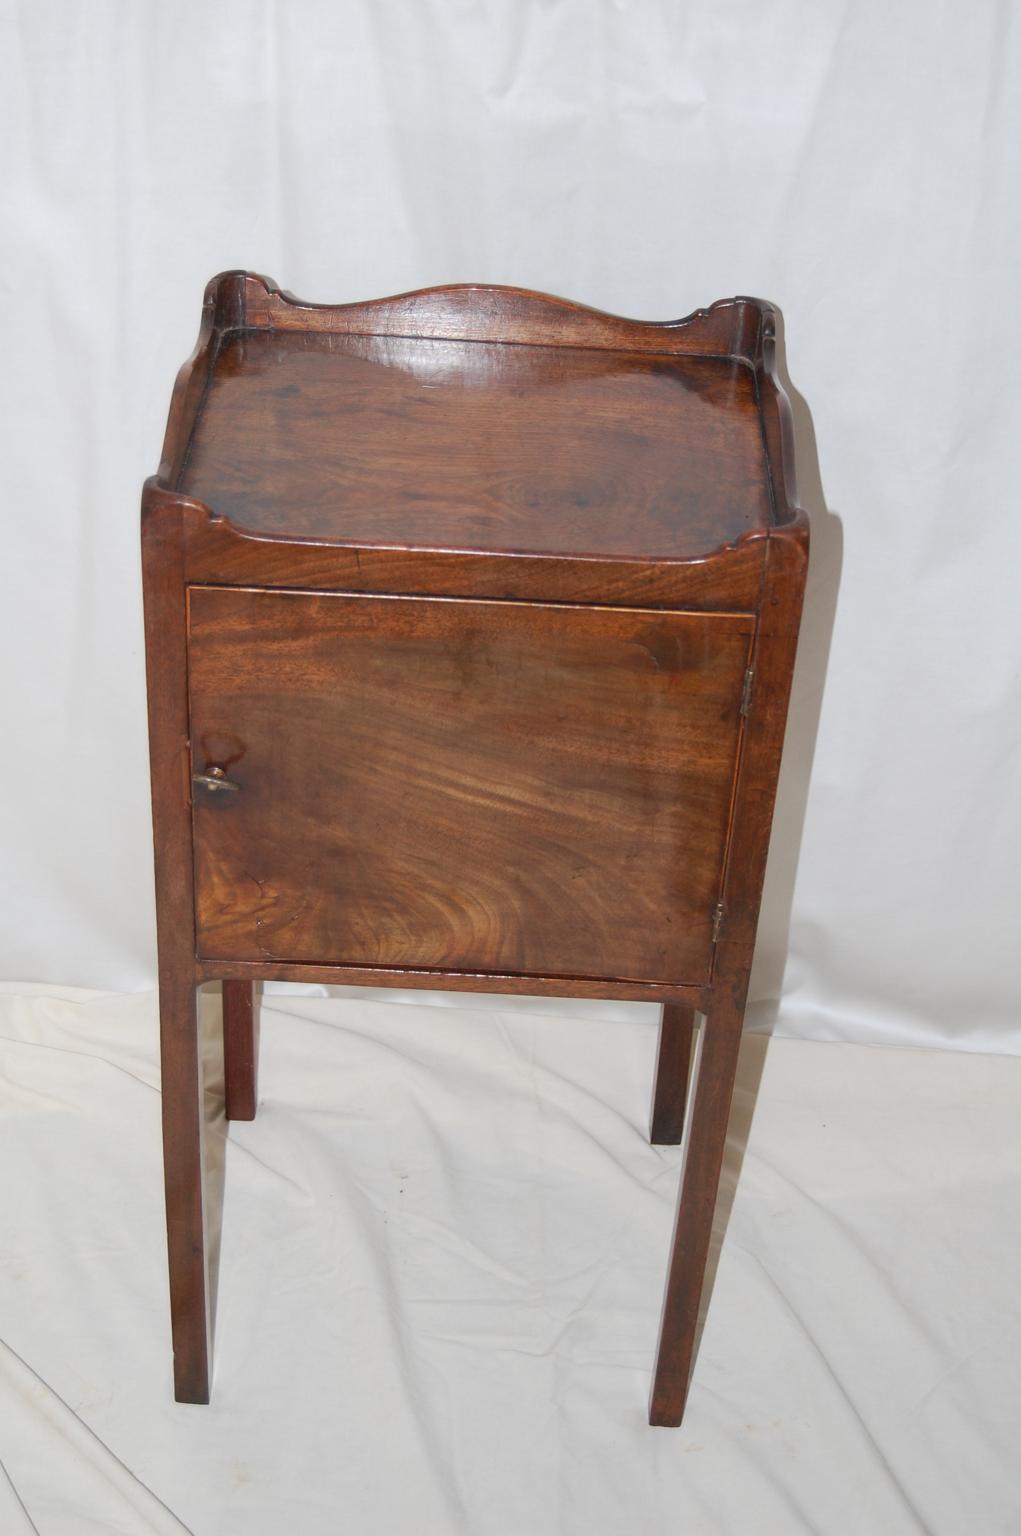 English Georgian mahogany pot cupboard with serpentine galleried top, lambs tongue corners and tapered legs. The cupboard space is accessed from the front of the table via the hinged door. The table is finished on all sides so it can free stand as